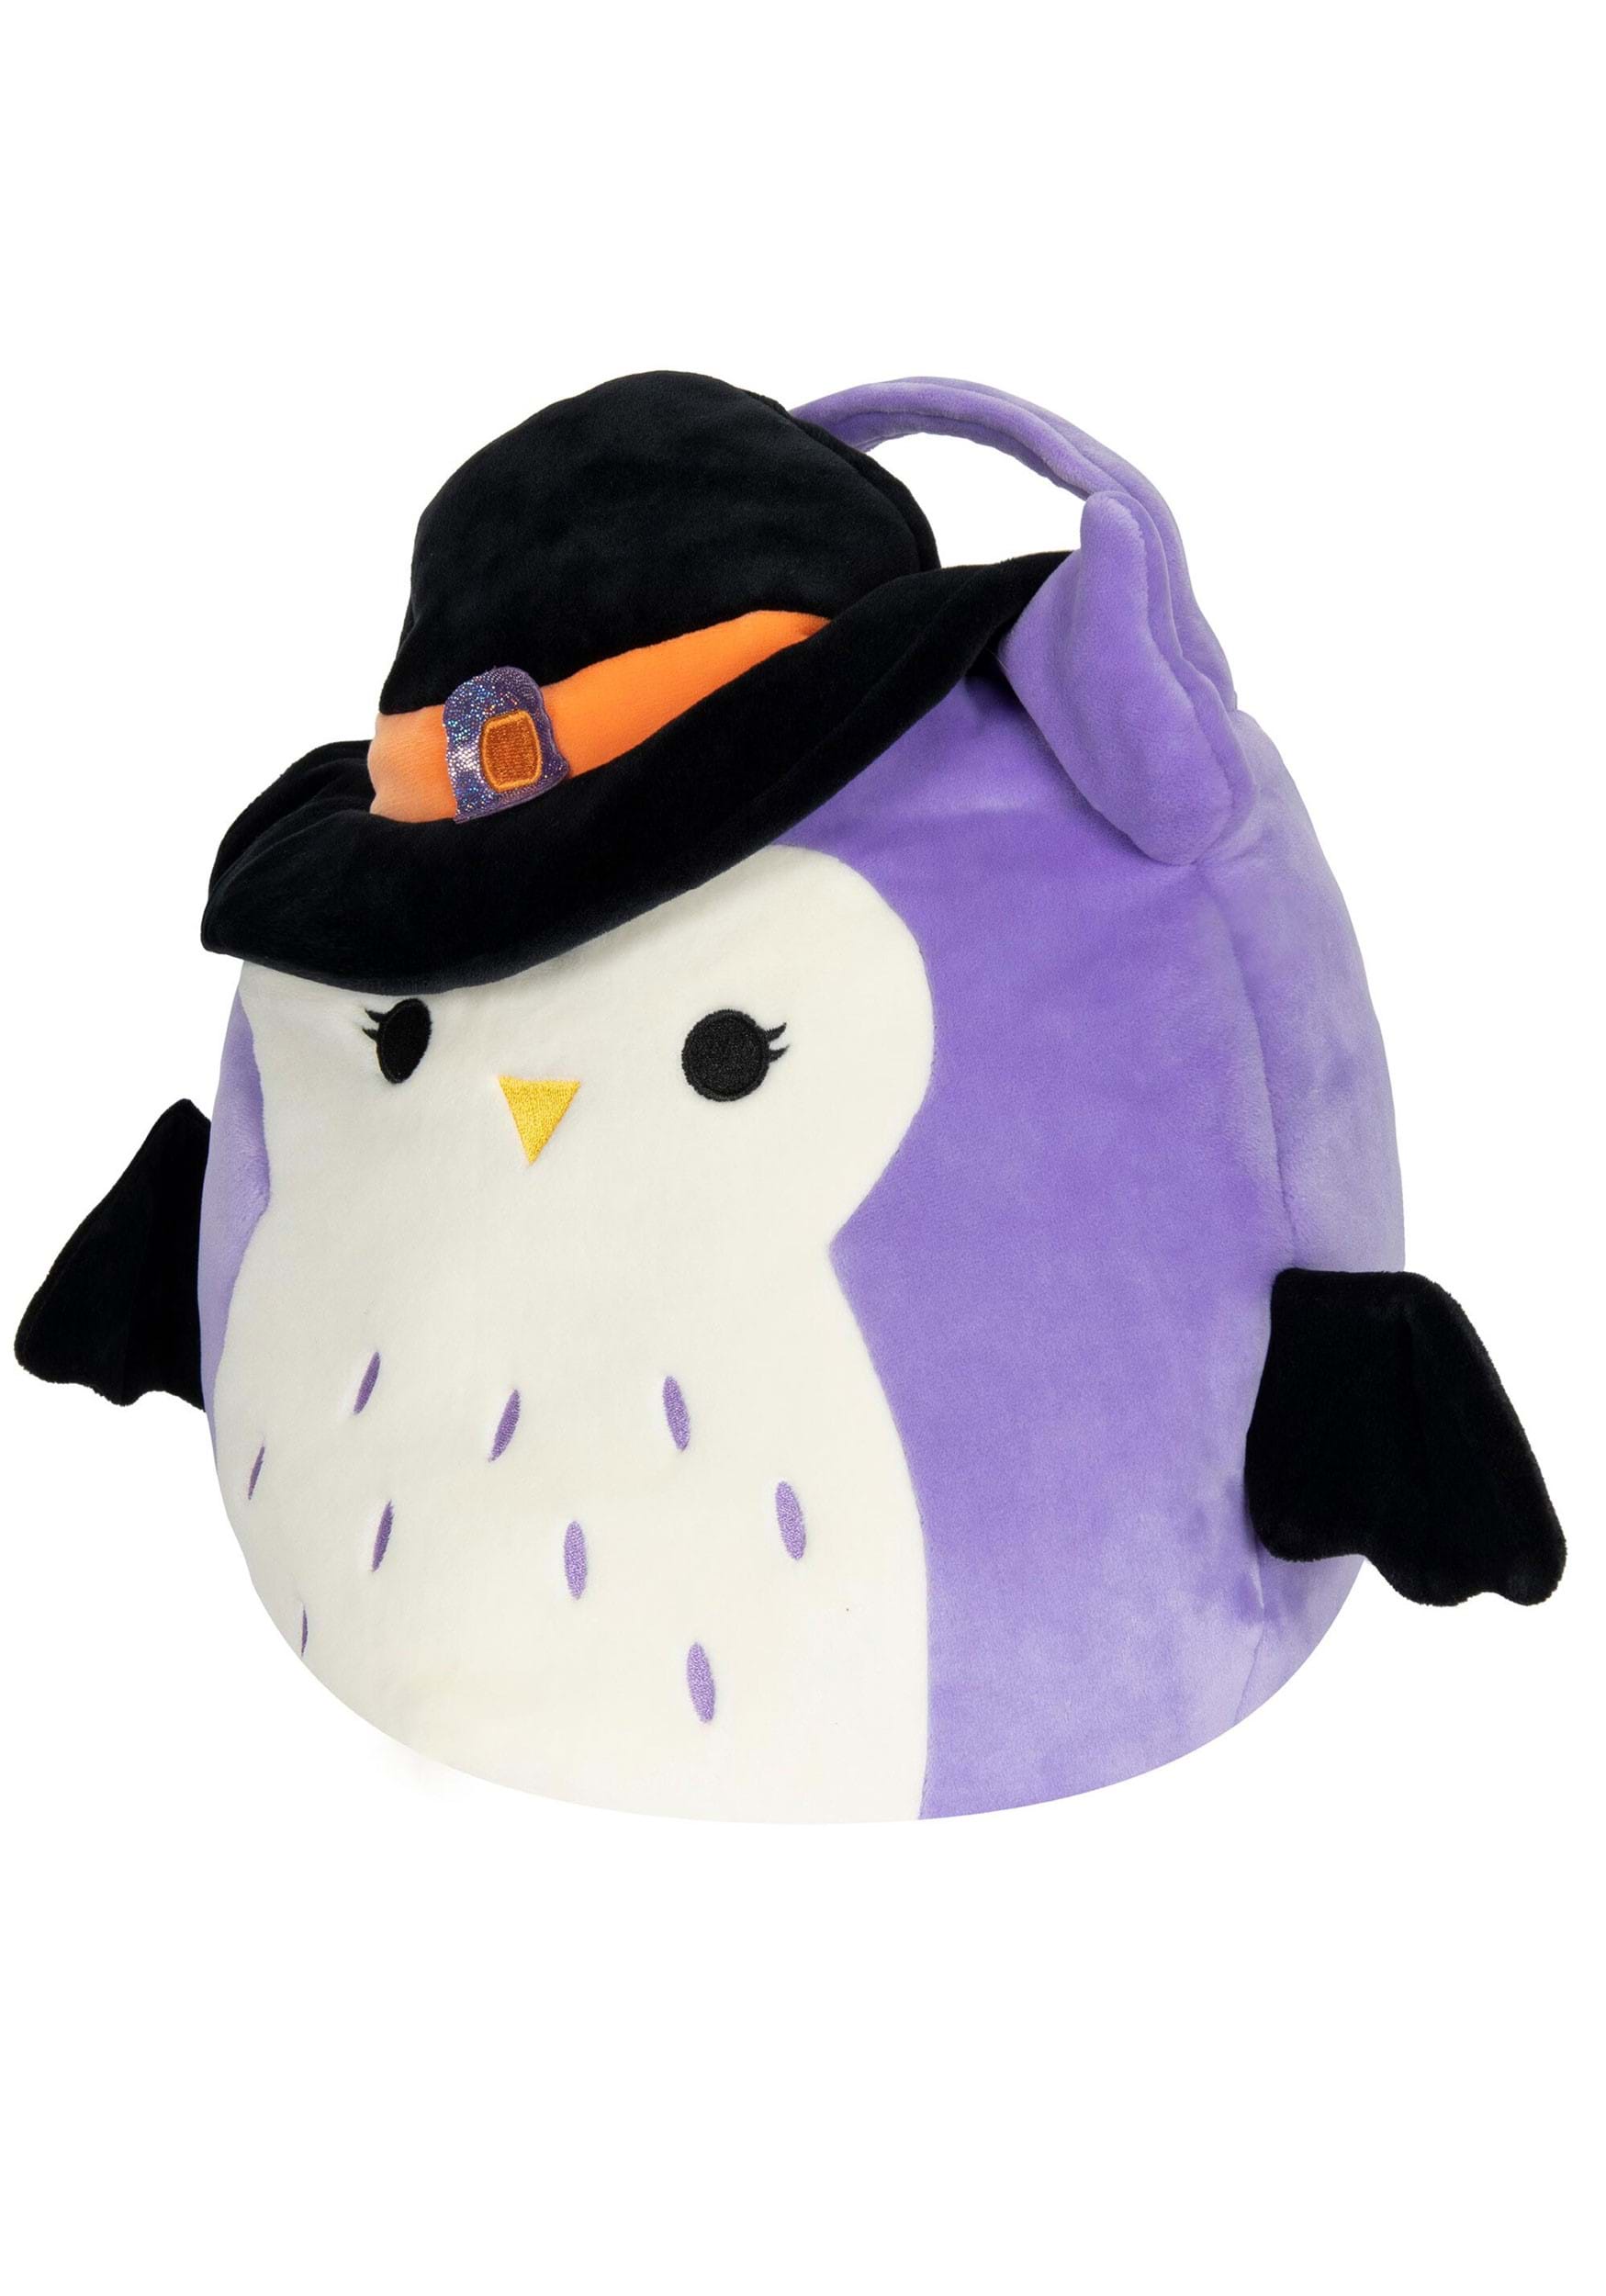 Squishmallow Halloween Treat Pail Holly the Owl